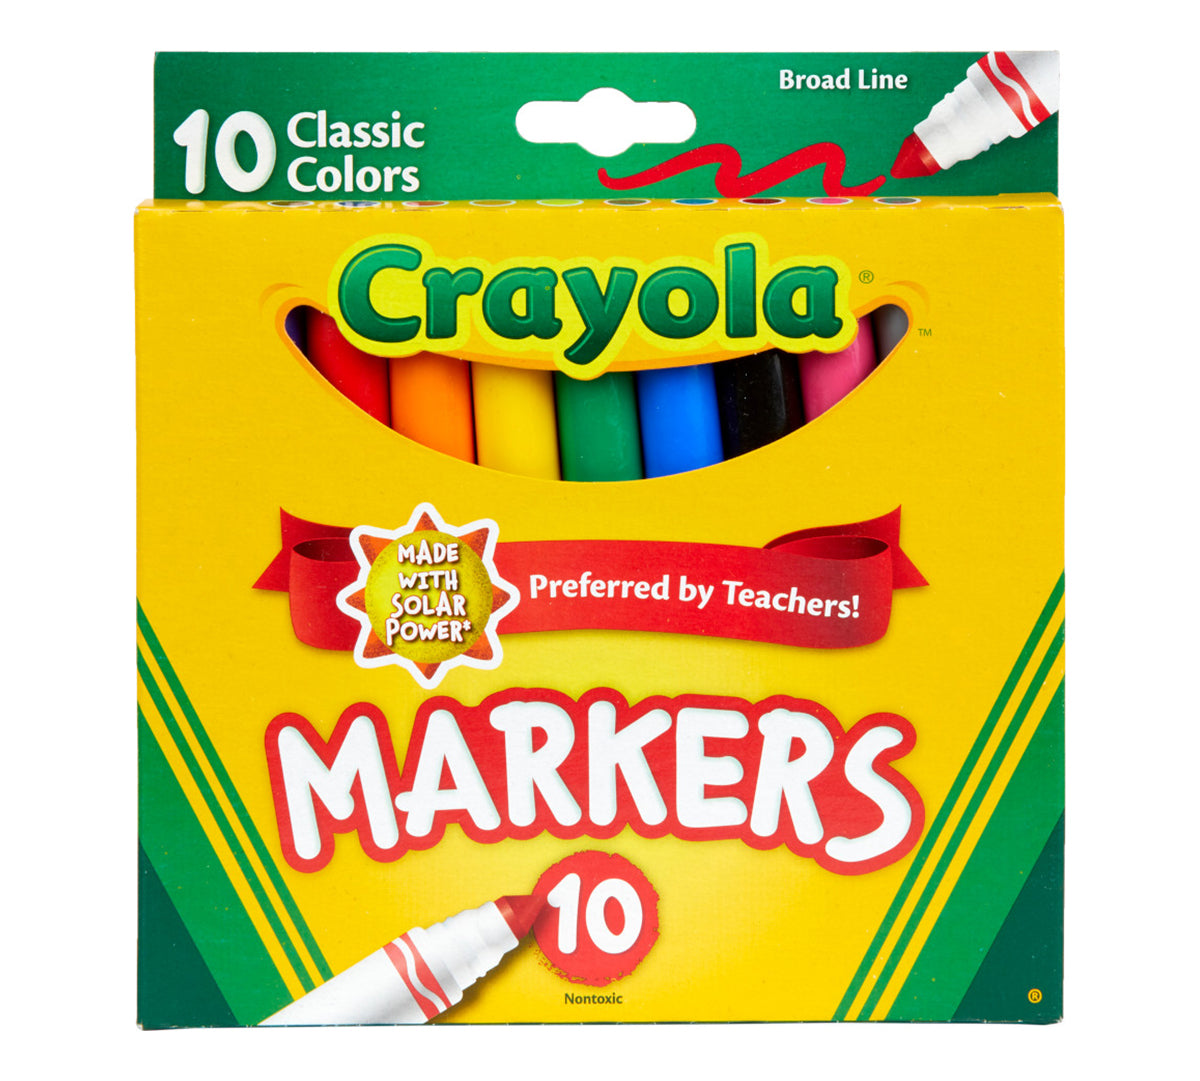 Crayola Classic Markers, Broad Line (10 count)